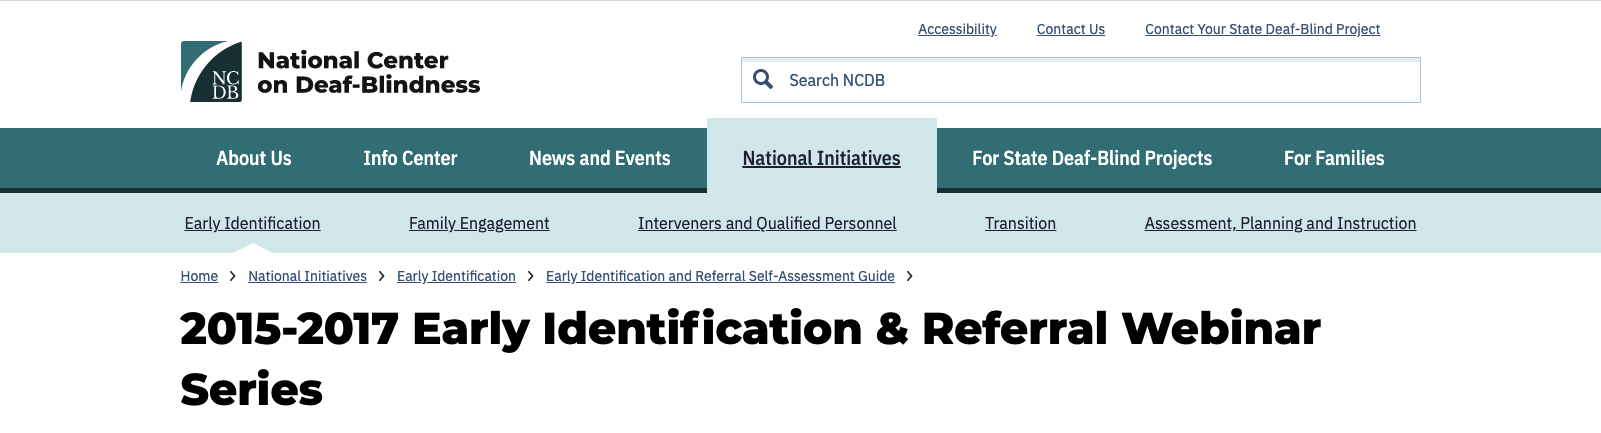 Screenshot of a subpage of the NCDB National Initiatives site section, showing breadcrumb navigation